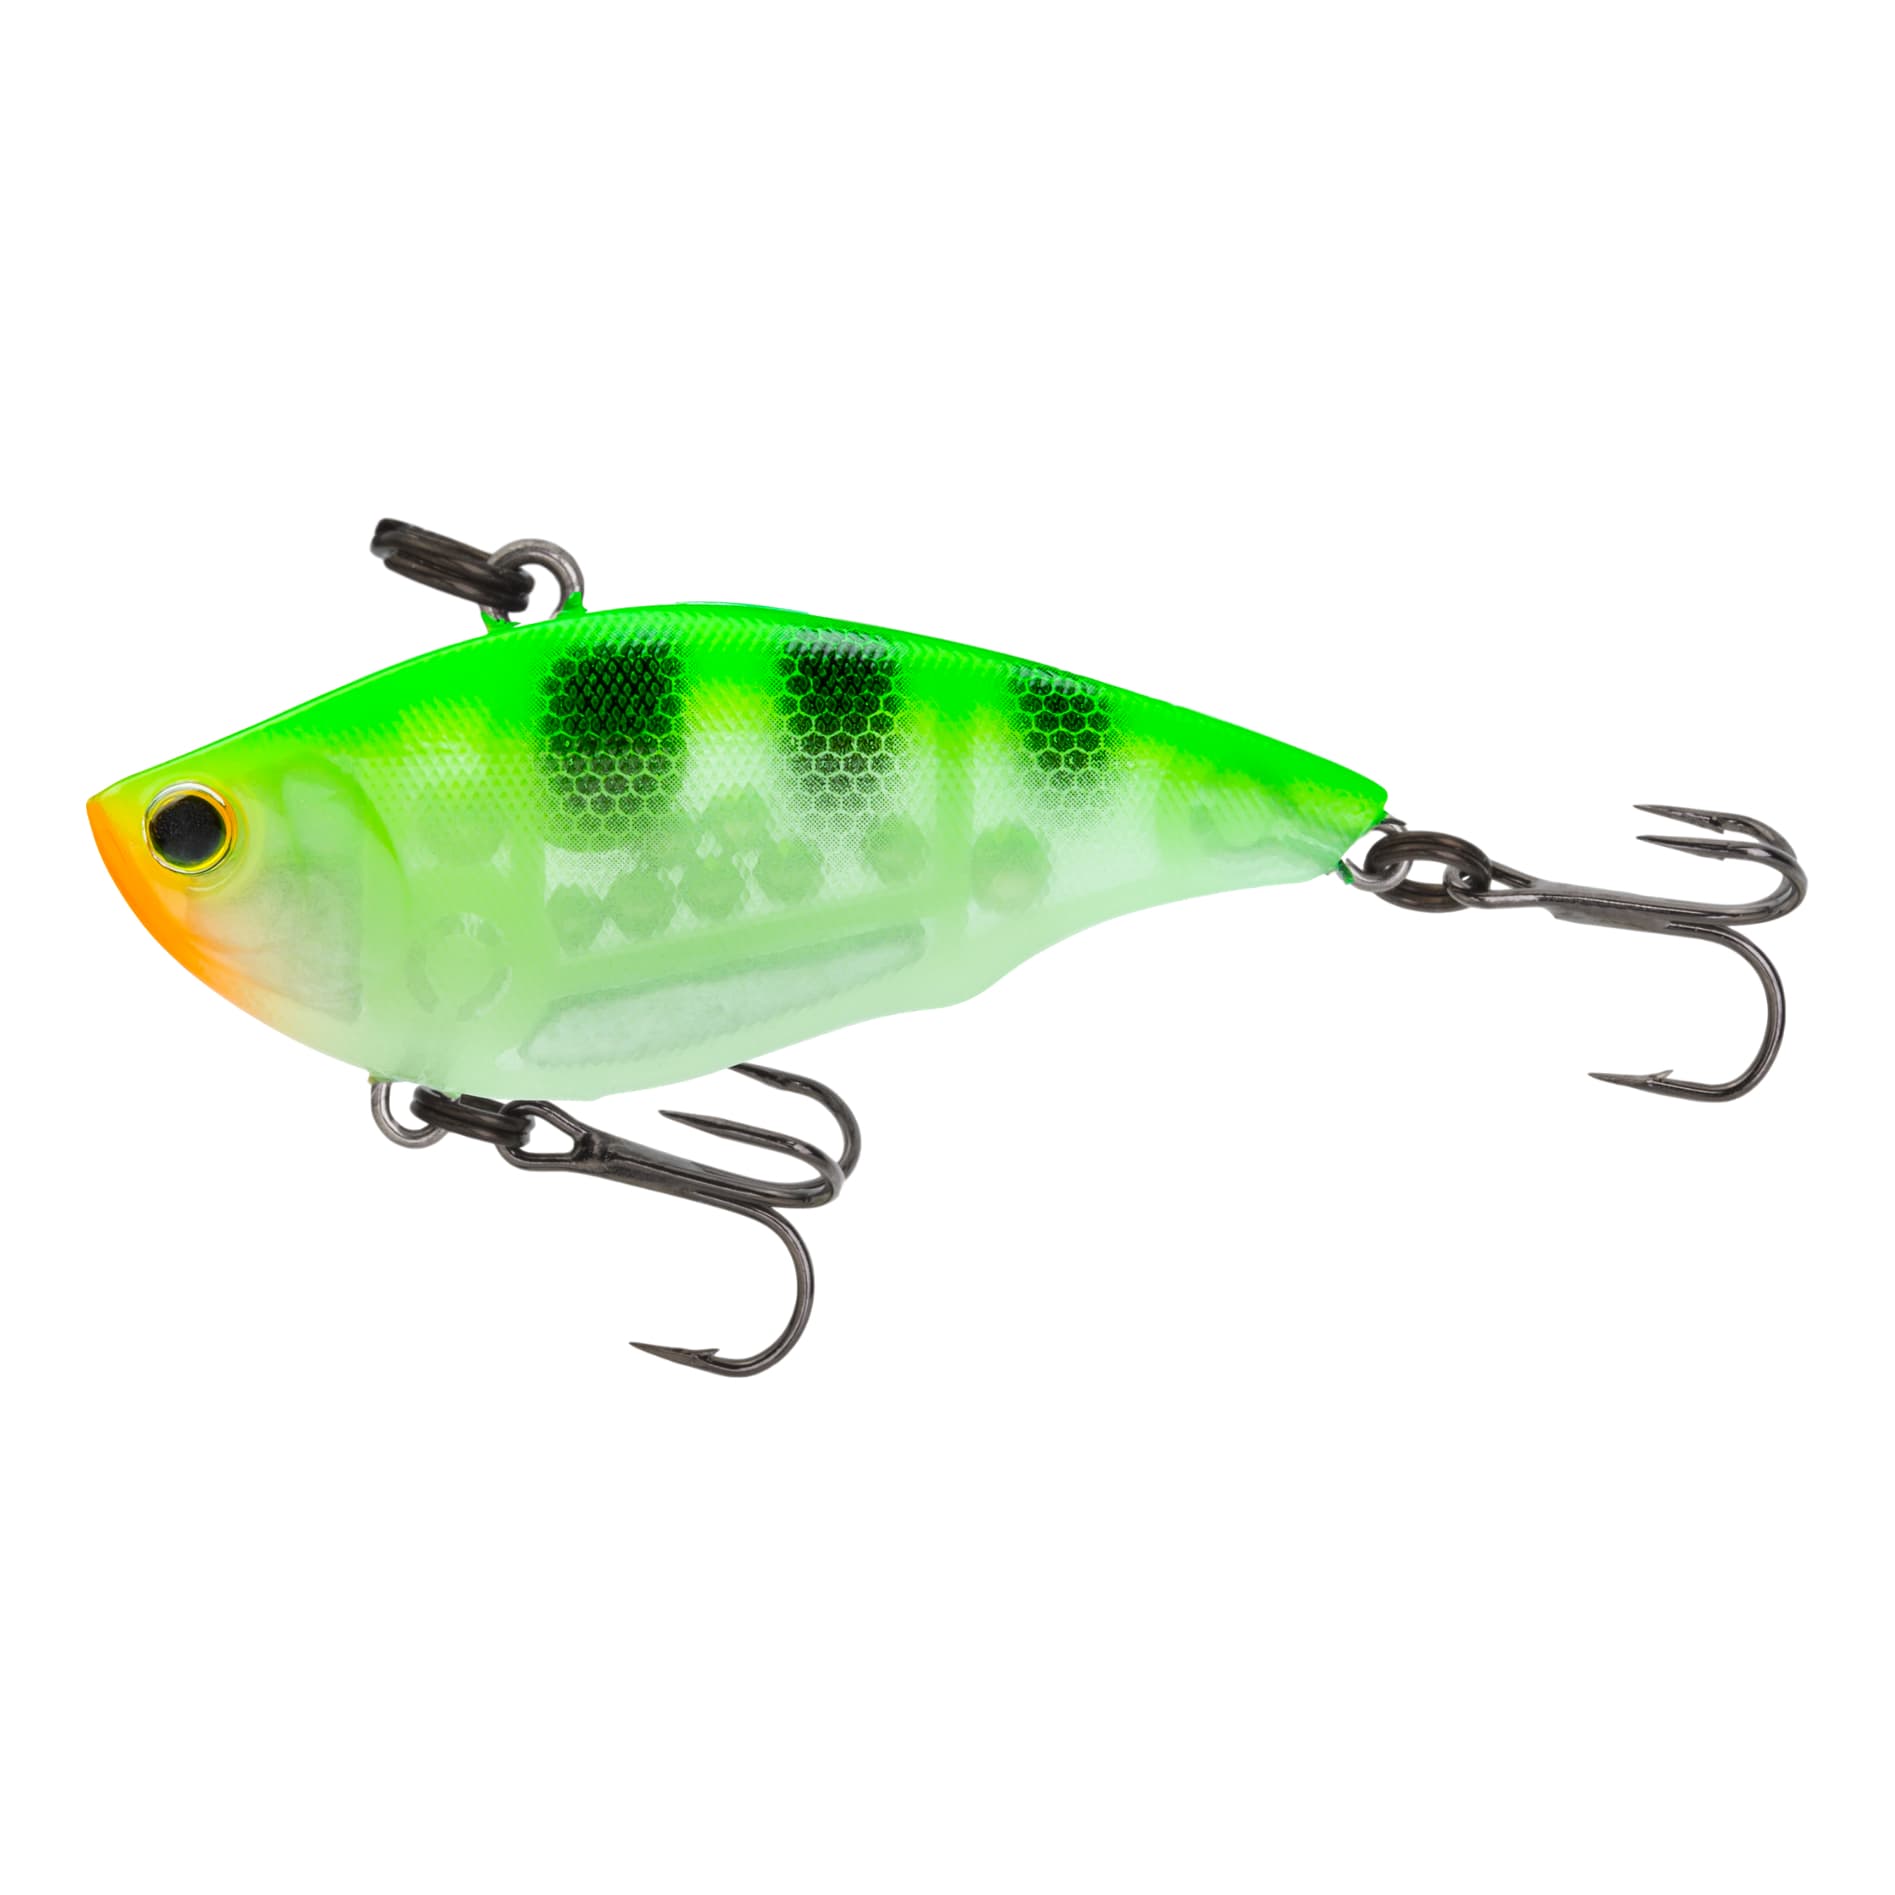  Moose Baits Lipless Crankbaits - Lipless Crankbait Fishing Lure  for Bass Fishing - Freshwater Crankbaits - Fishing Lures - 5/8oz Crankbait  (Goldfish) : Sports & Outdoors